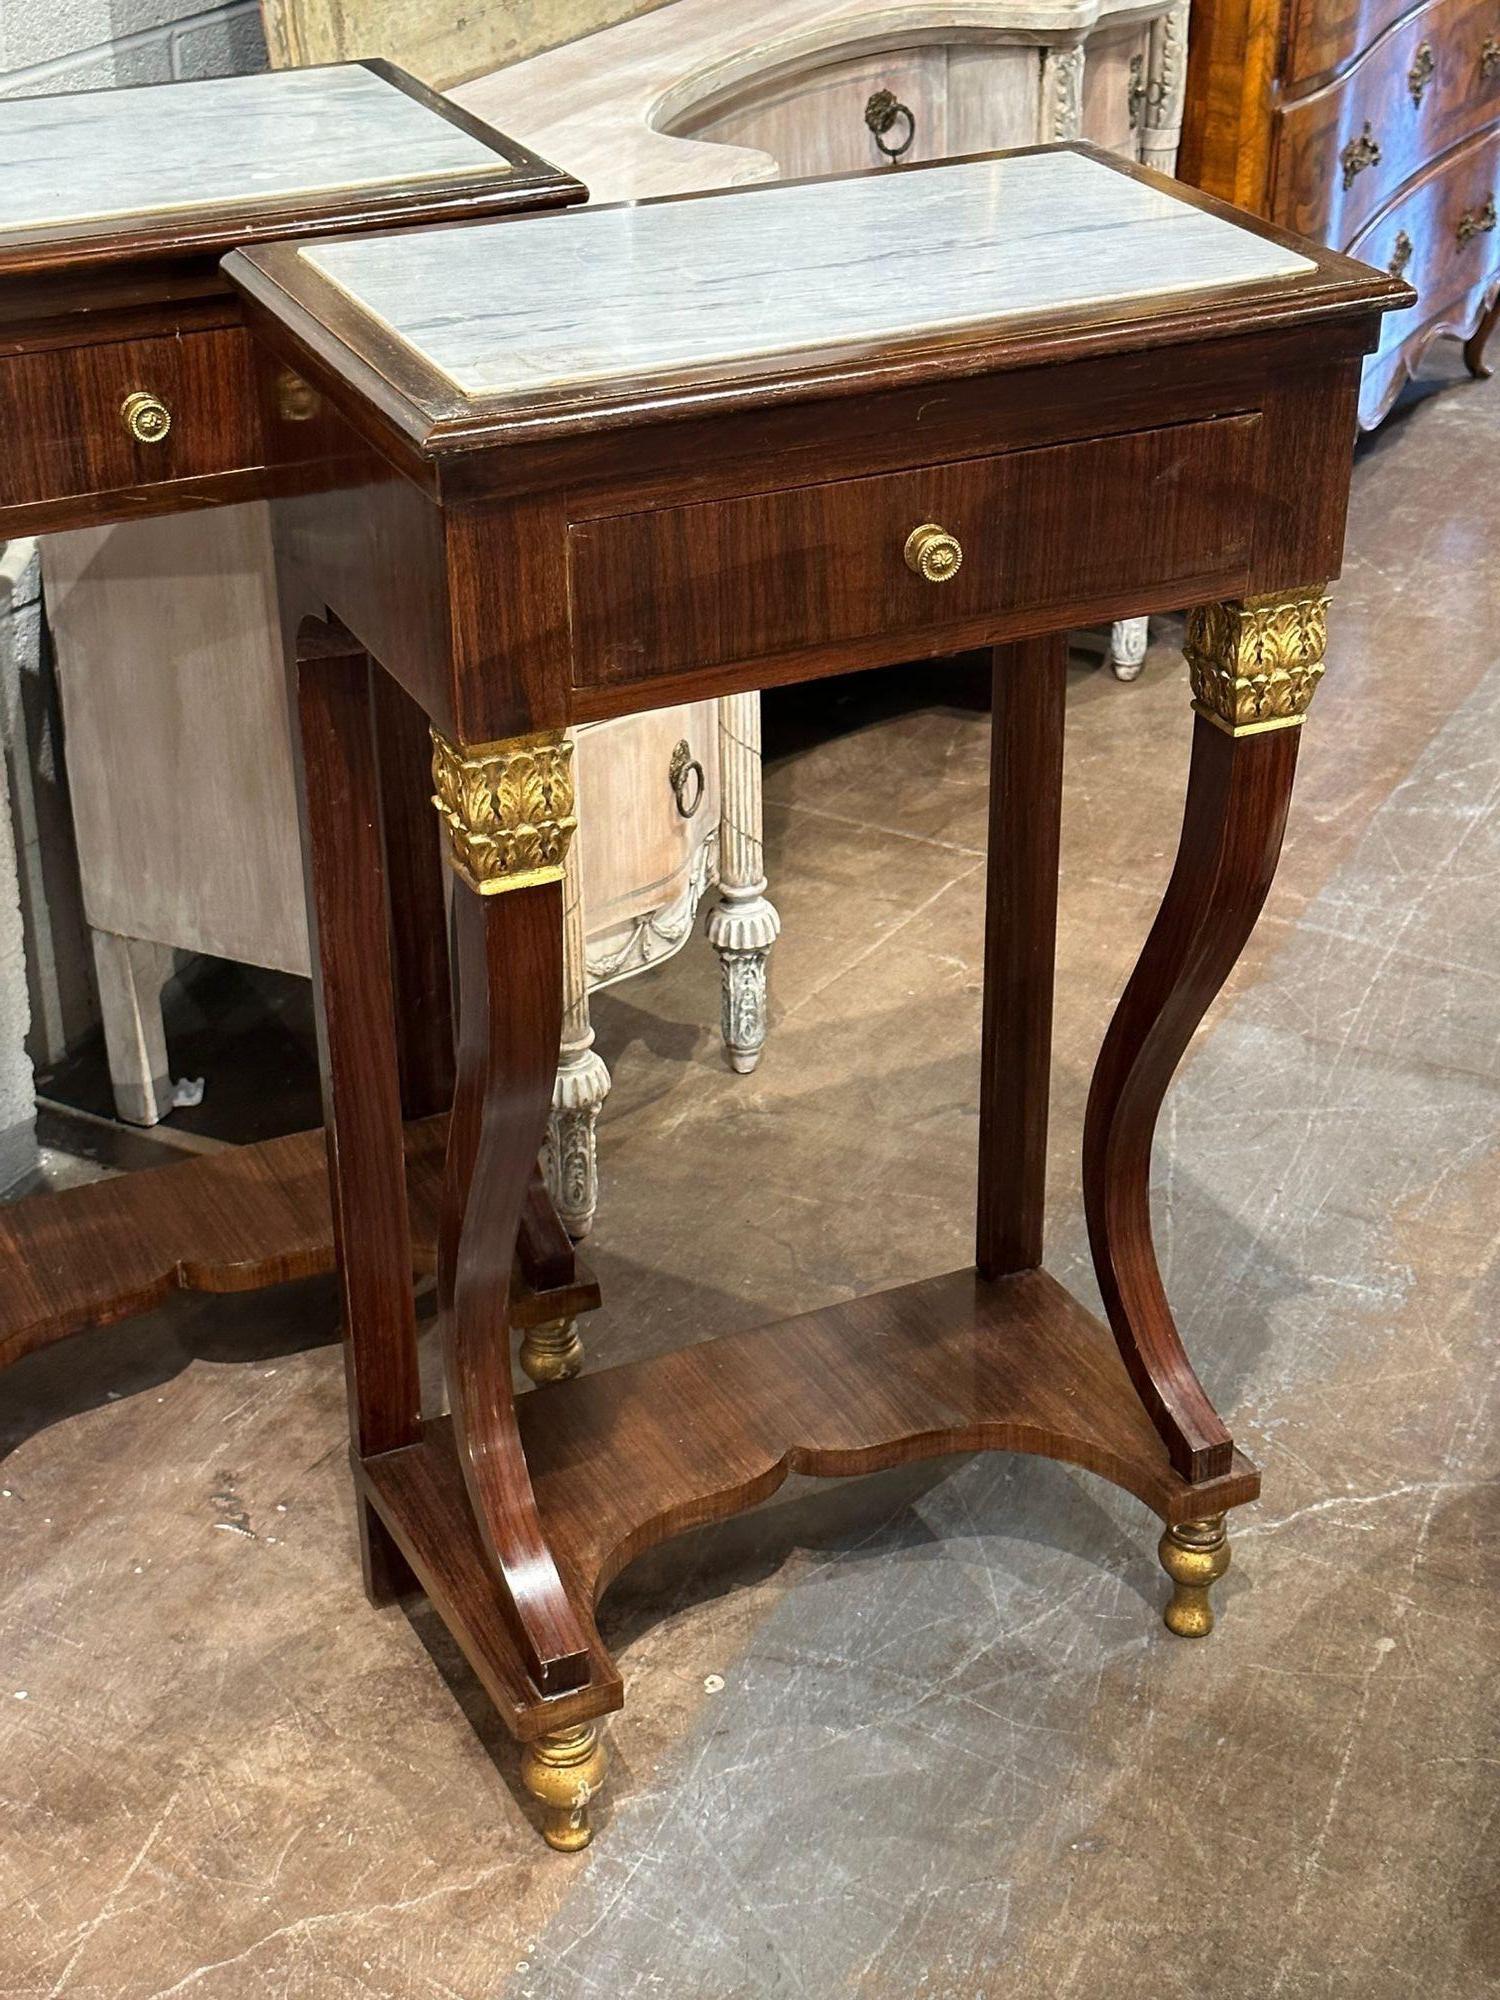 Nice pair of Italian Empire style mahogany and gilded marble top side tables. Circa 1880. Adds warmth and charm to any room!